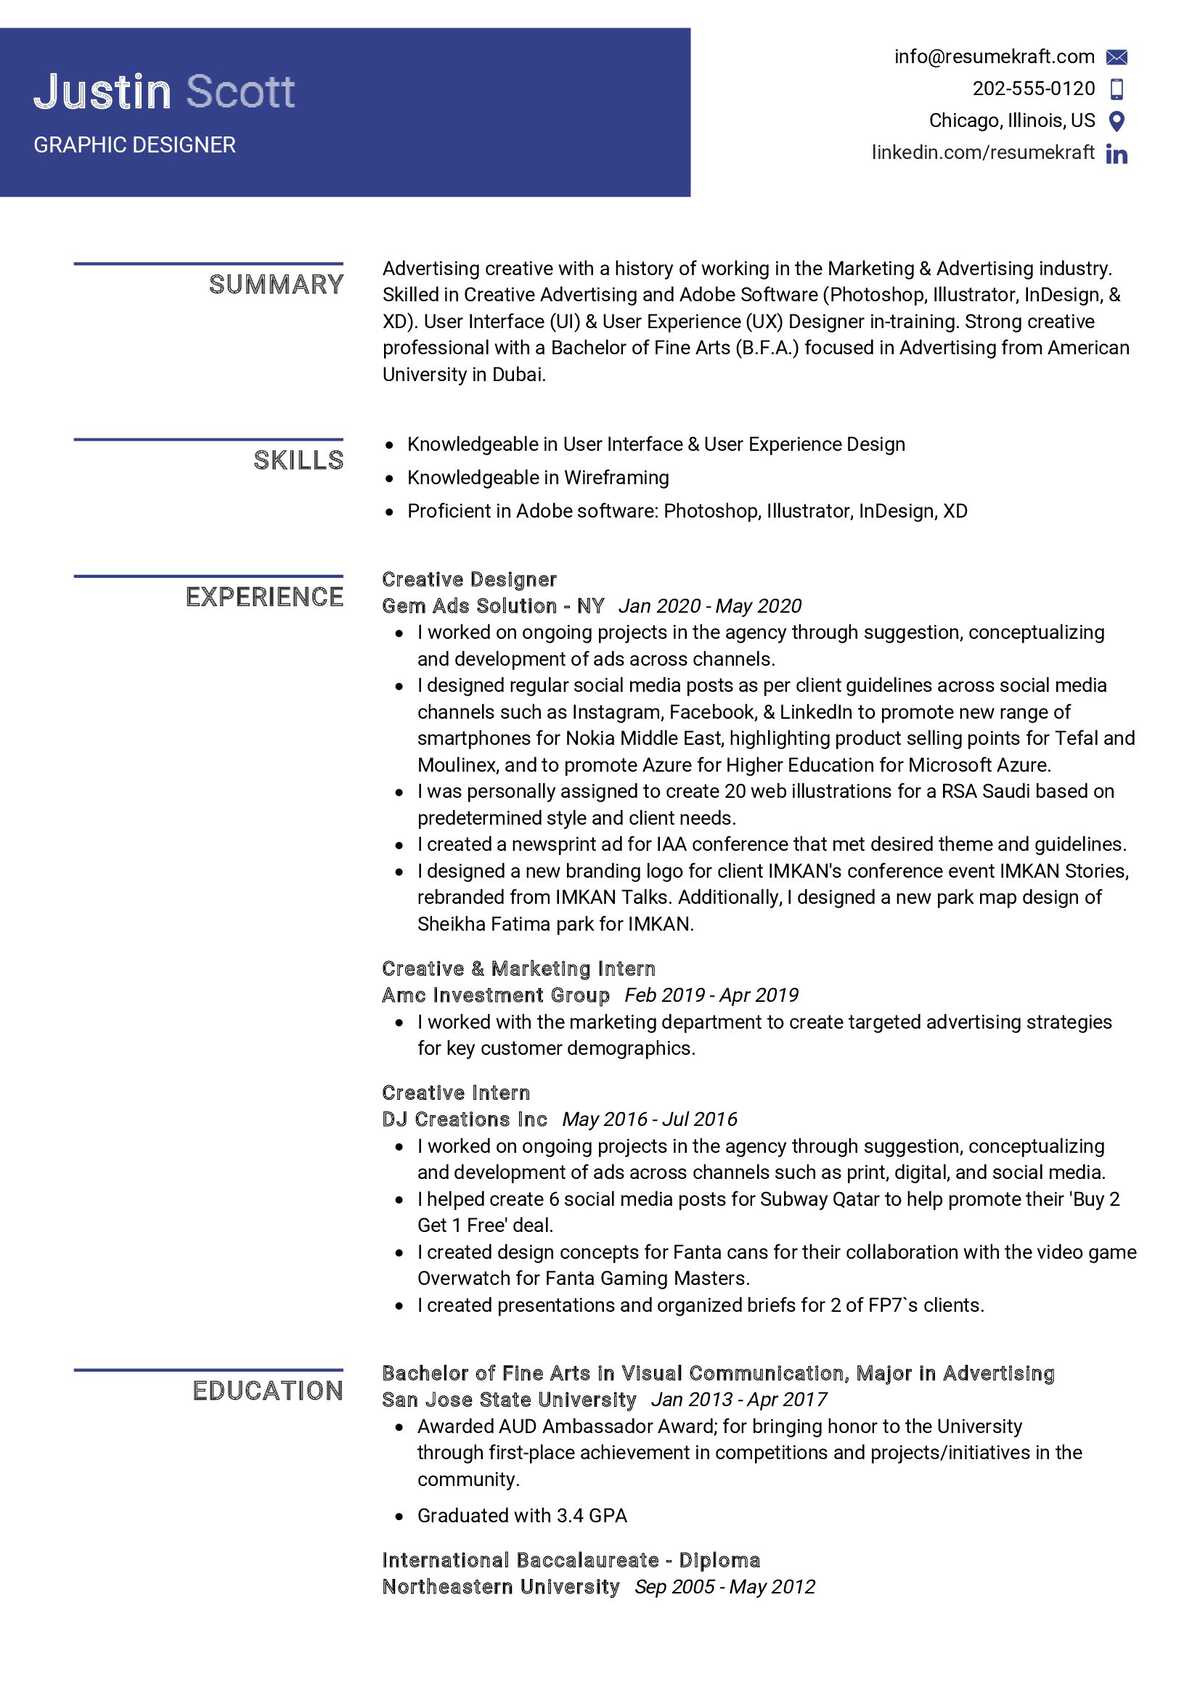 Sample Achievements In Resume for Graphic Designer Graphic Designer Resume Sample 2022 Writing Tips – Resumekraft